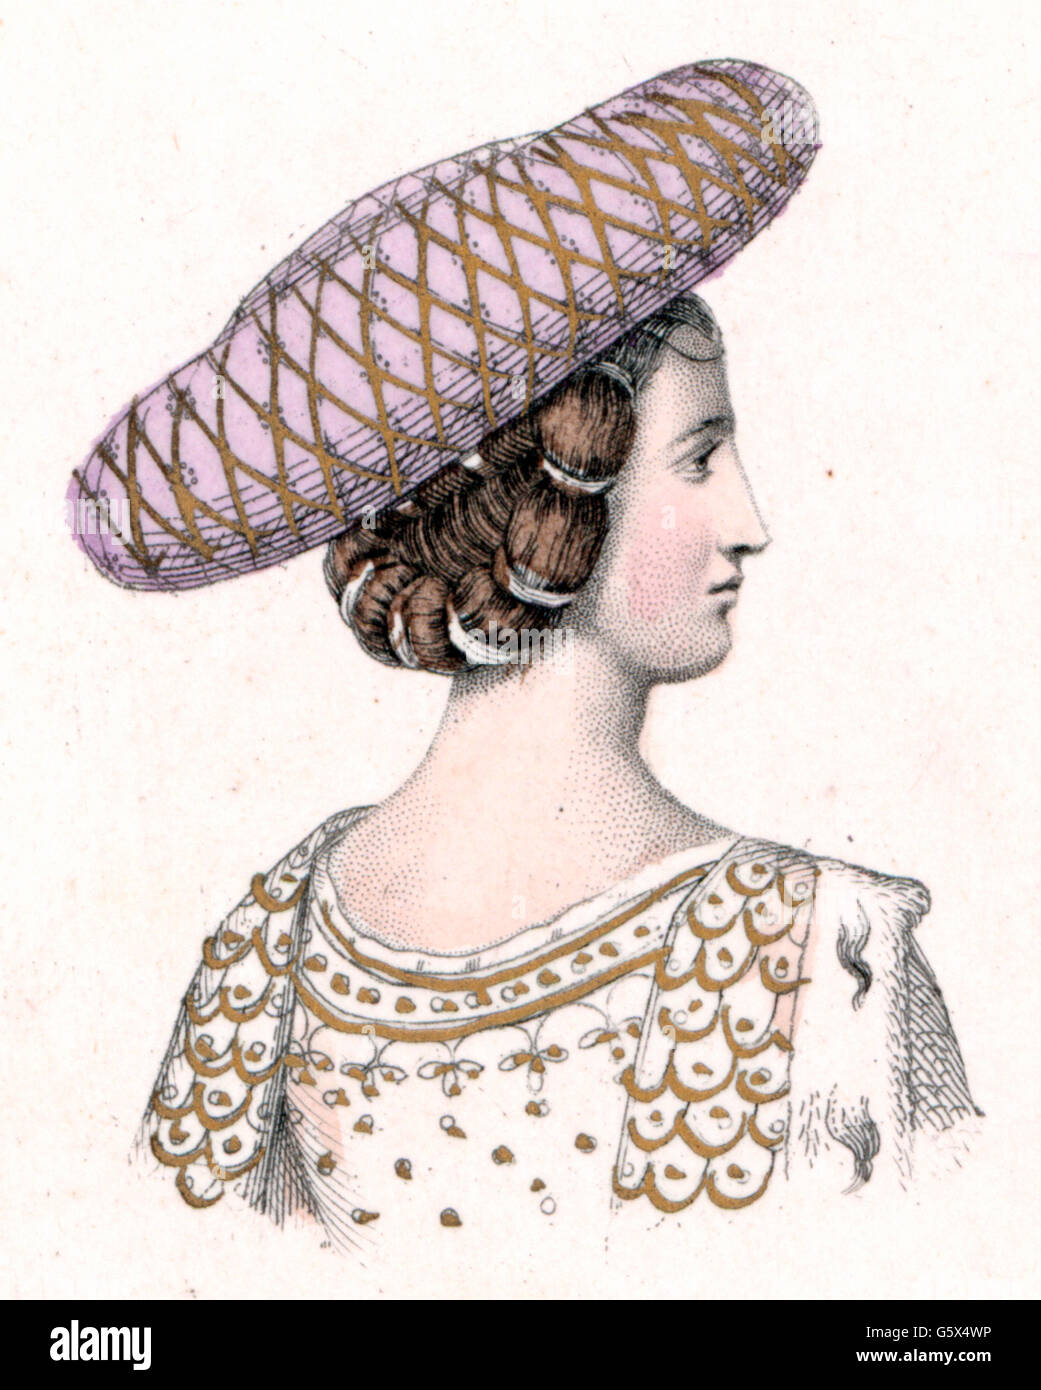 Middle Ages, people, woman with hat, Italy, late 14th century, coloured  engraving, 19th century, 14th century, 19th century, Middle Ages, medieval,  mediaeval, graphic, graphics, Italy, fashion, clothes, outfit, outfits,  accessory, accessories, headpiece,